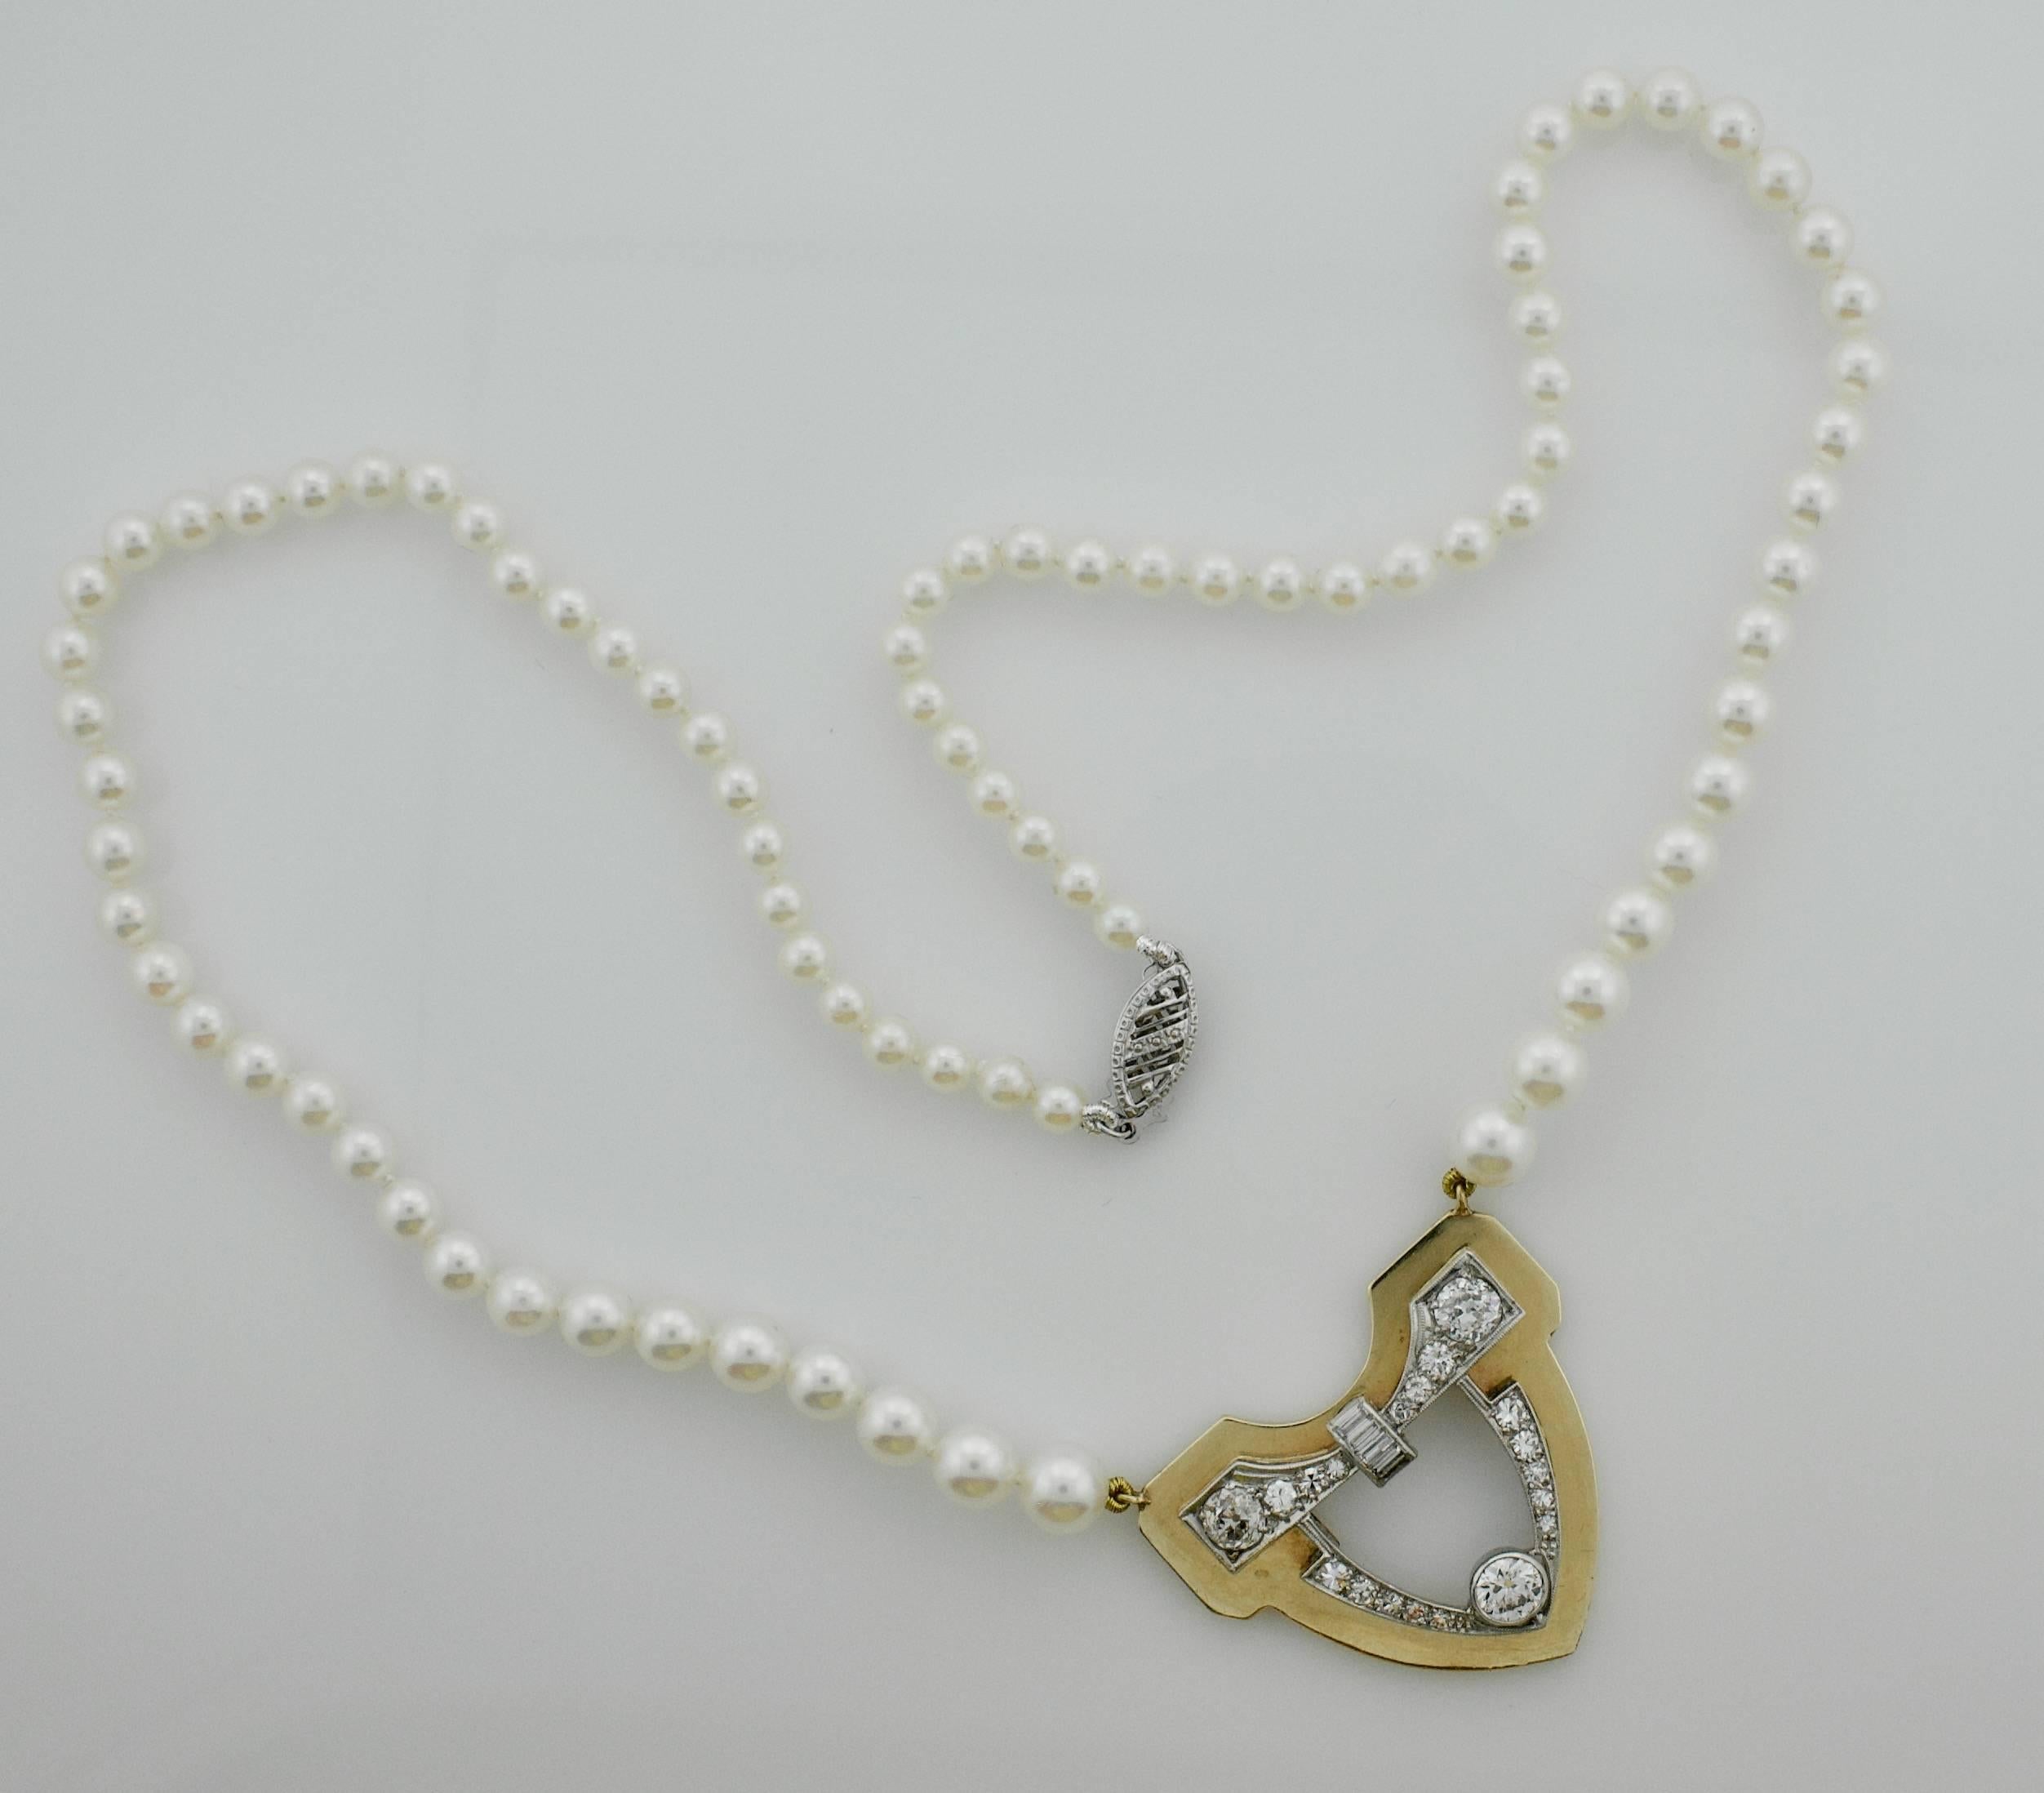 Art Deco Platinum and Yellow Gold Diamond and Pearl Necklace, circa 1930s-1950s